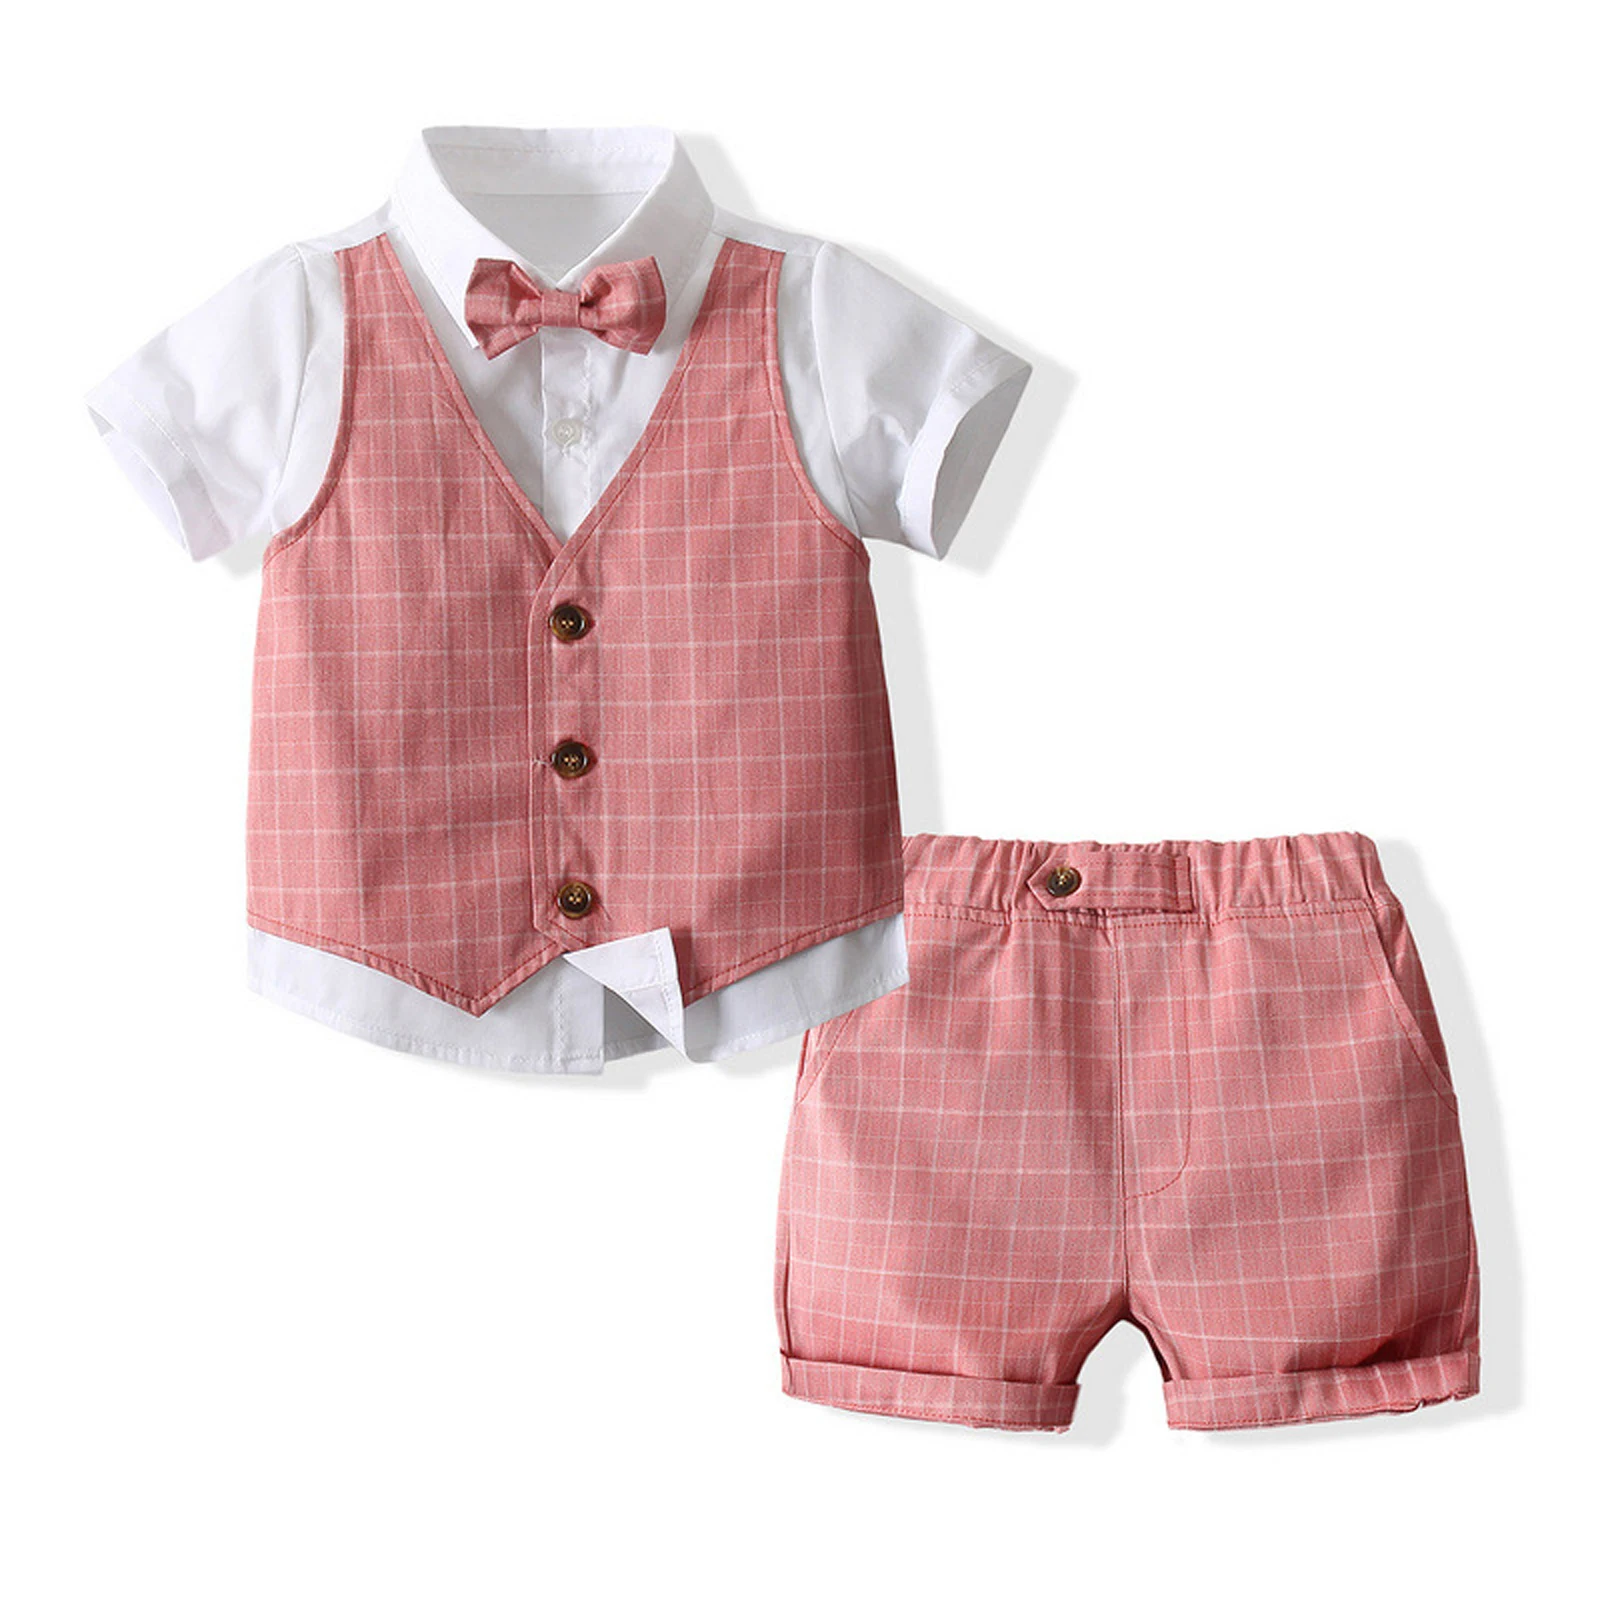 

Toddles Boys Outfit Set Gentleman Short Sleeve Fake Two Piece Button Closure Top with Elastic Waistband Shorts and Bow Tie